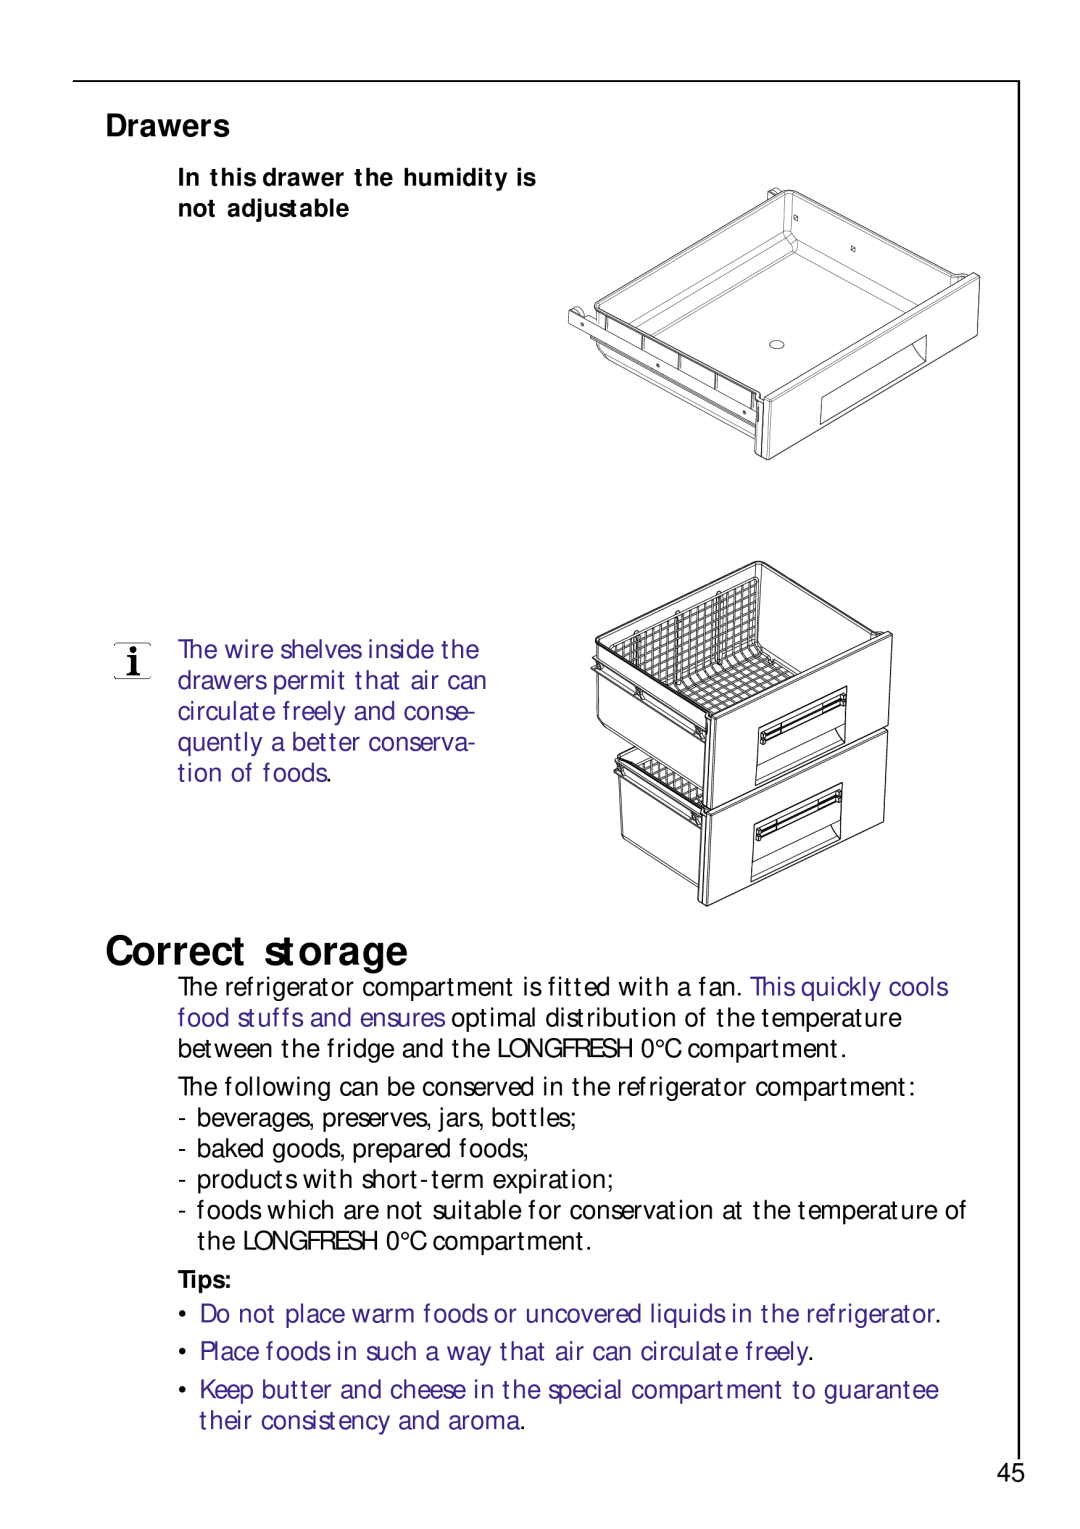 Electrolux Z 9 18 42-4 I user manual Correct storage, Drawers, In this drawer the humidity is not adjustable, Tips 